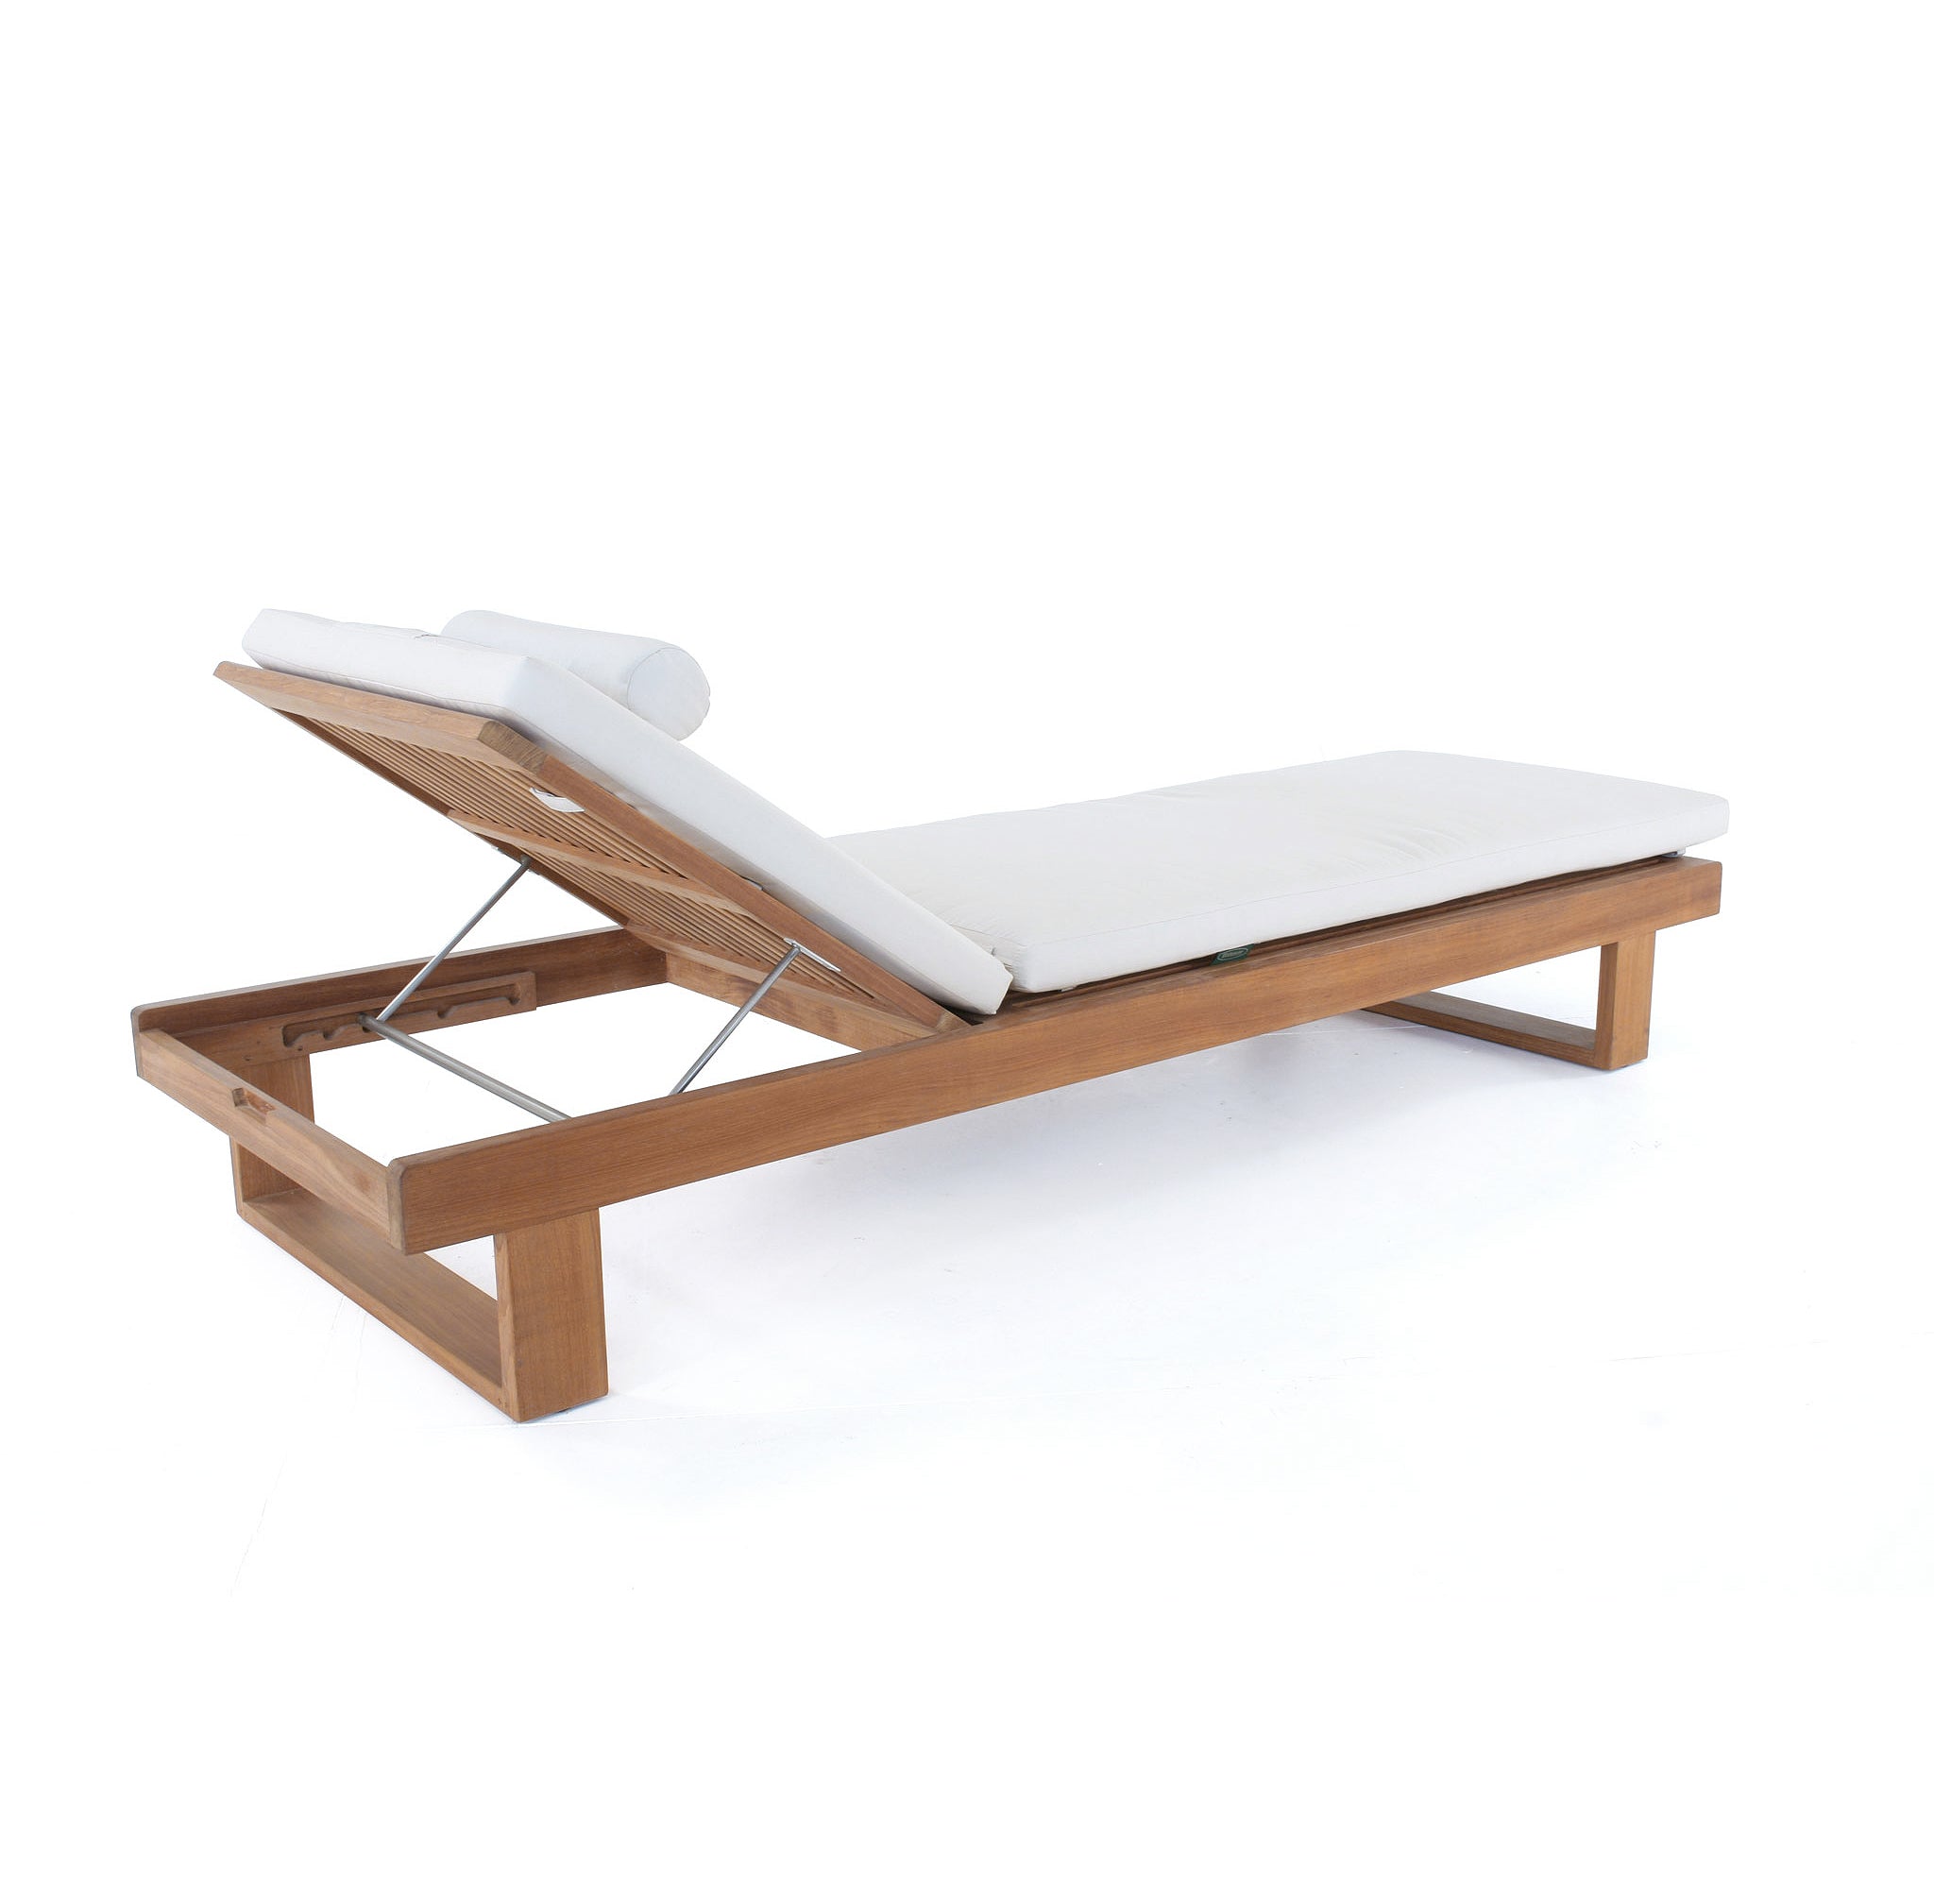 Westminster Teak - Horizon Chaise Lounger Cushion Included - 16770DP